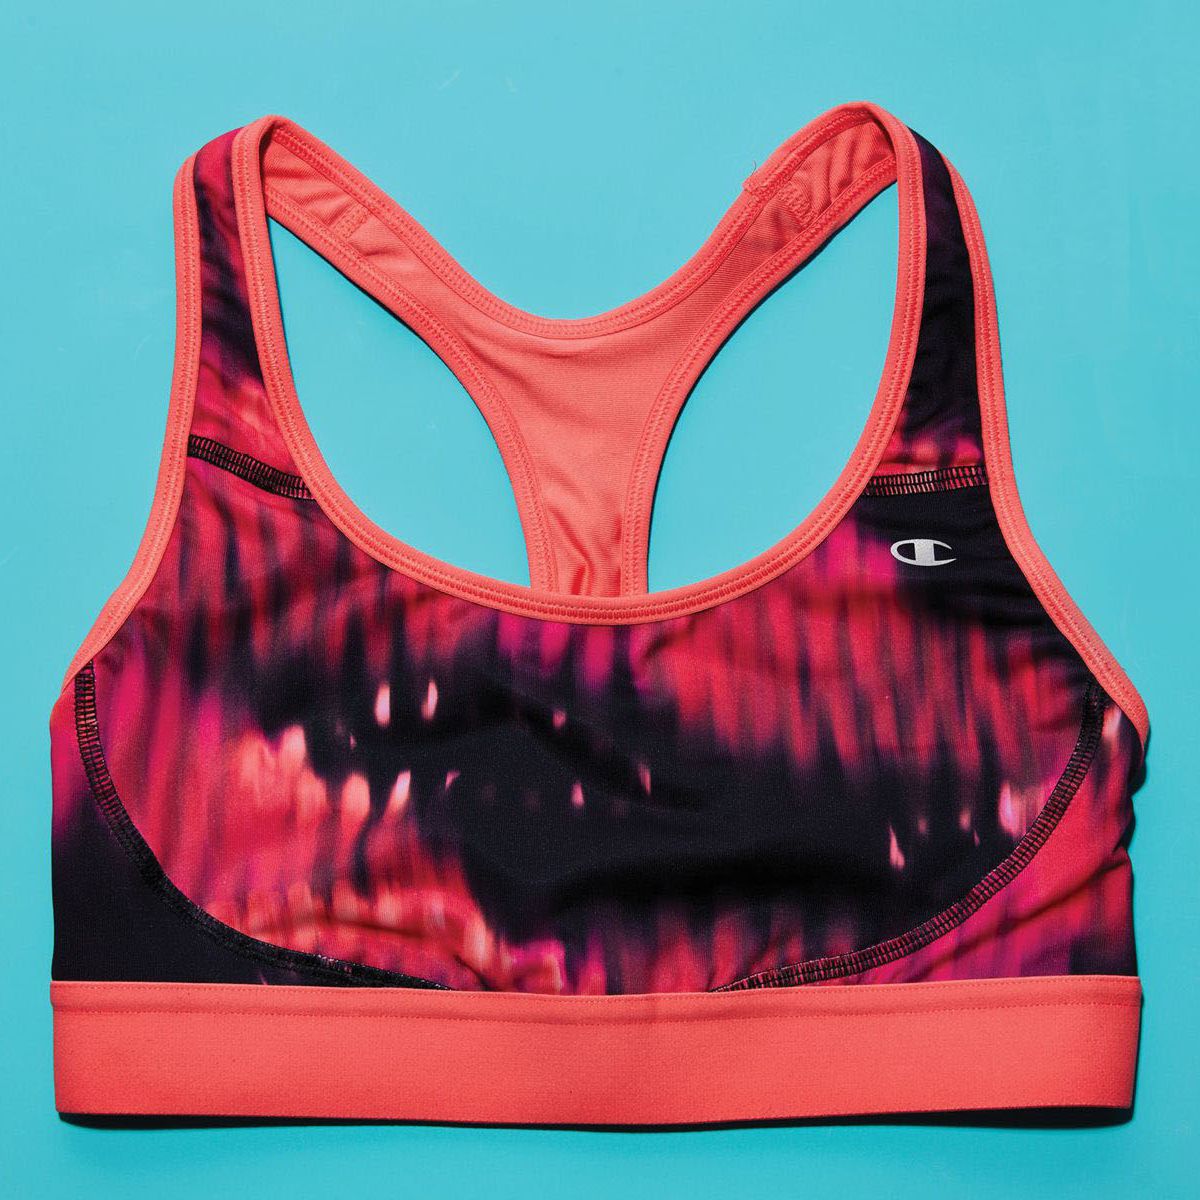 Champion Absolute Shape Sports Bra with SmoothTec Band B0822